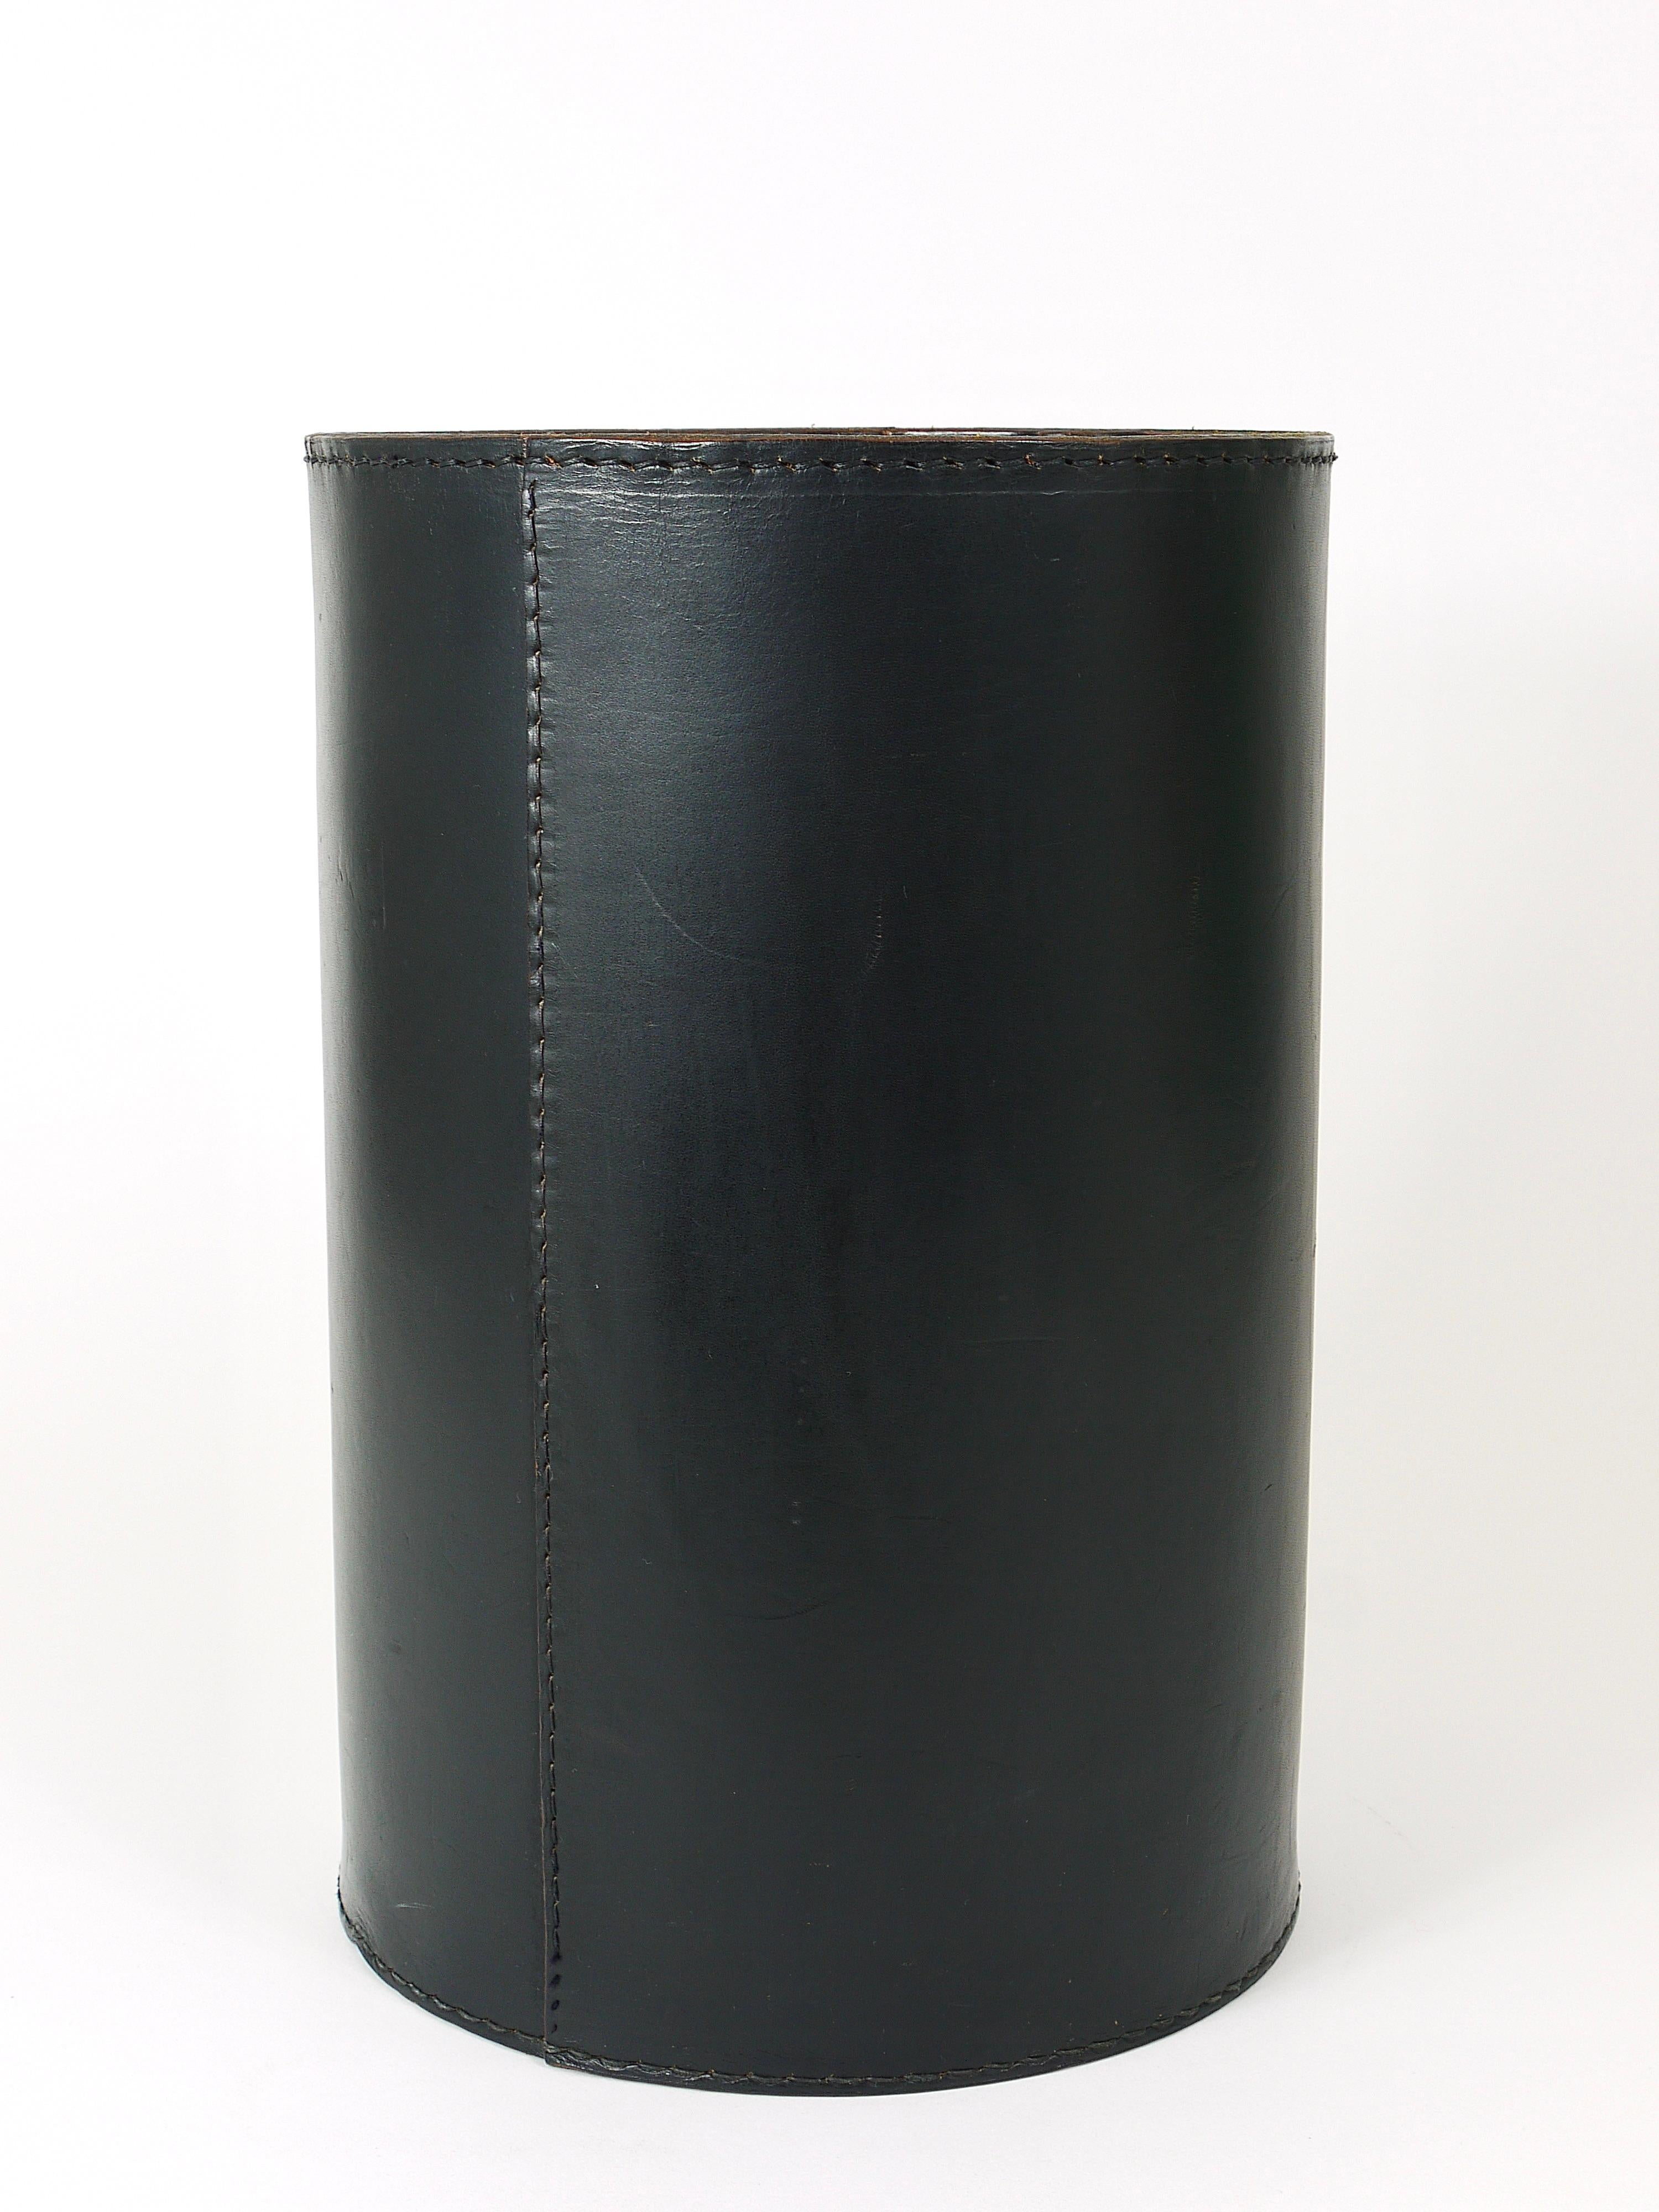 A beautiful cylindric Mid-Century Modern wastepaper basket from the 1950s, designed an executed by Carl Auböck, Vienna. Made of black leather. In good condition, with normal signs of age and charming patina.